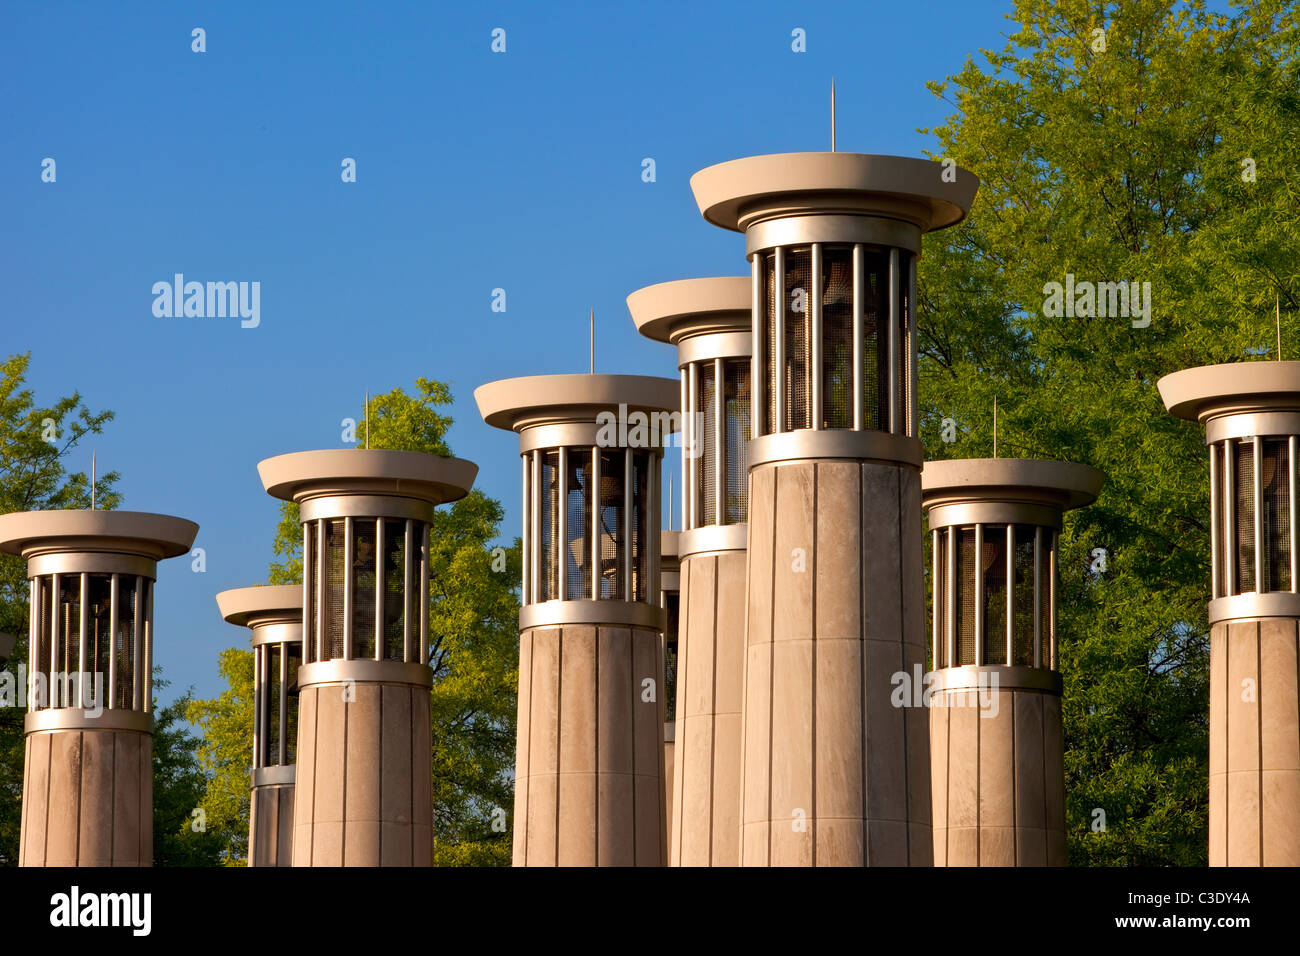 Carillon bell towers in Bicentennial Park, Nashville Tennessee USA Stock Photo